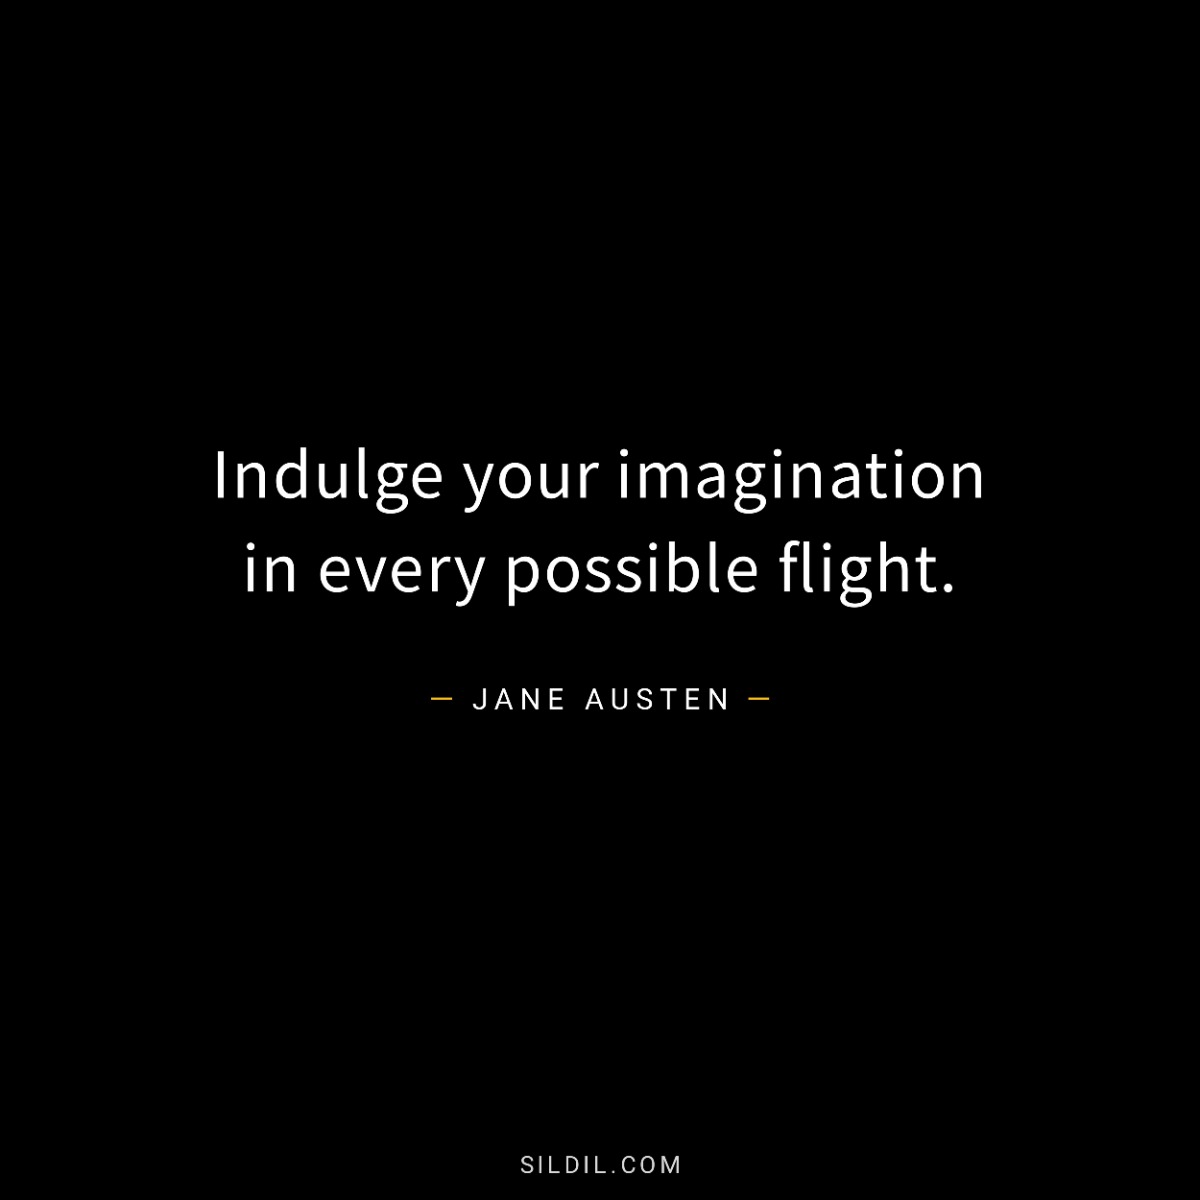 Indulge your imagination in every possible flight.